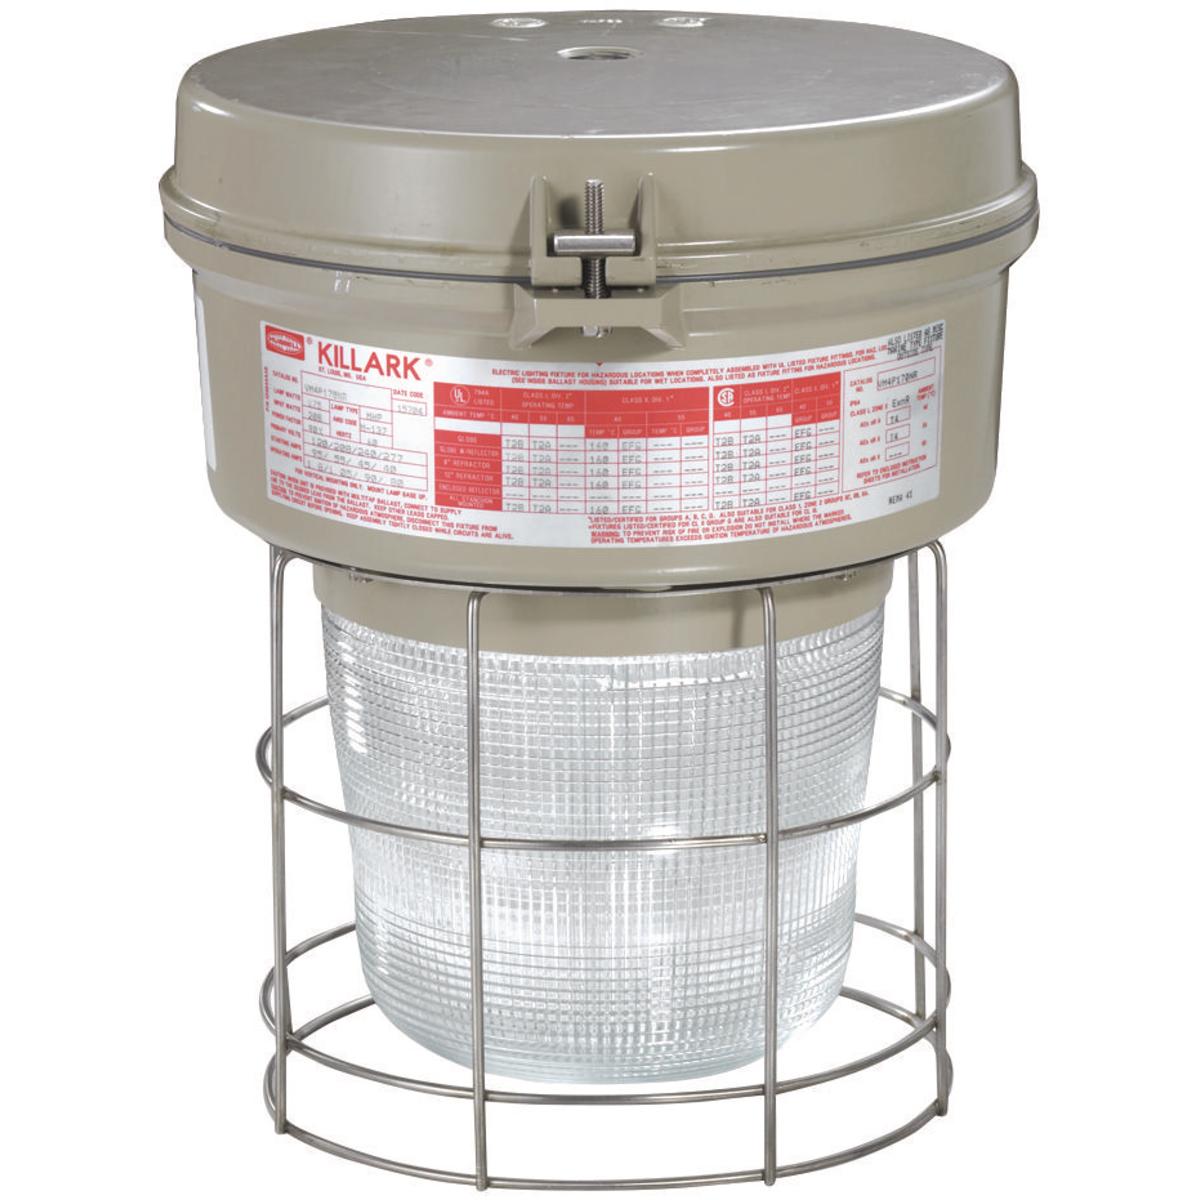 Hubbell VM4S155F2R5G VM4 Series - 150W High Pressure Sodium 480V - 3/4" Flexible Pendant - Type V Glass Refractor and Guard  ; Ballast tank and splice box – corrosion resistant copper-free aluminum alloy with baked powder epoxy/polyester finish, electrostatically applied for 